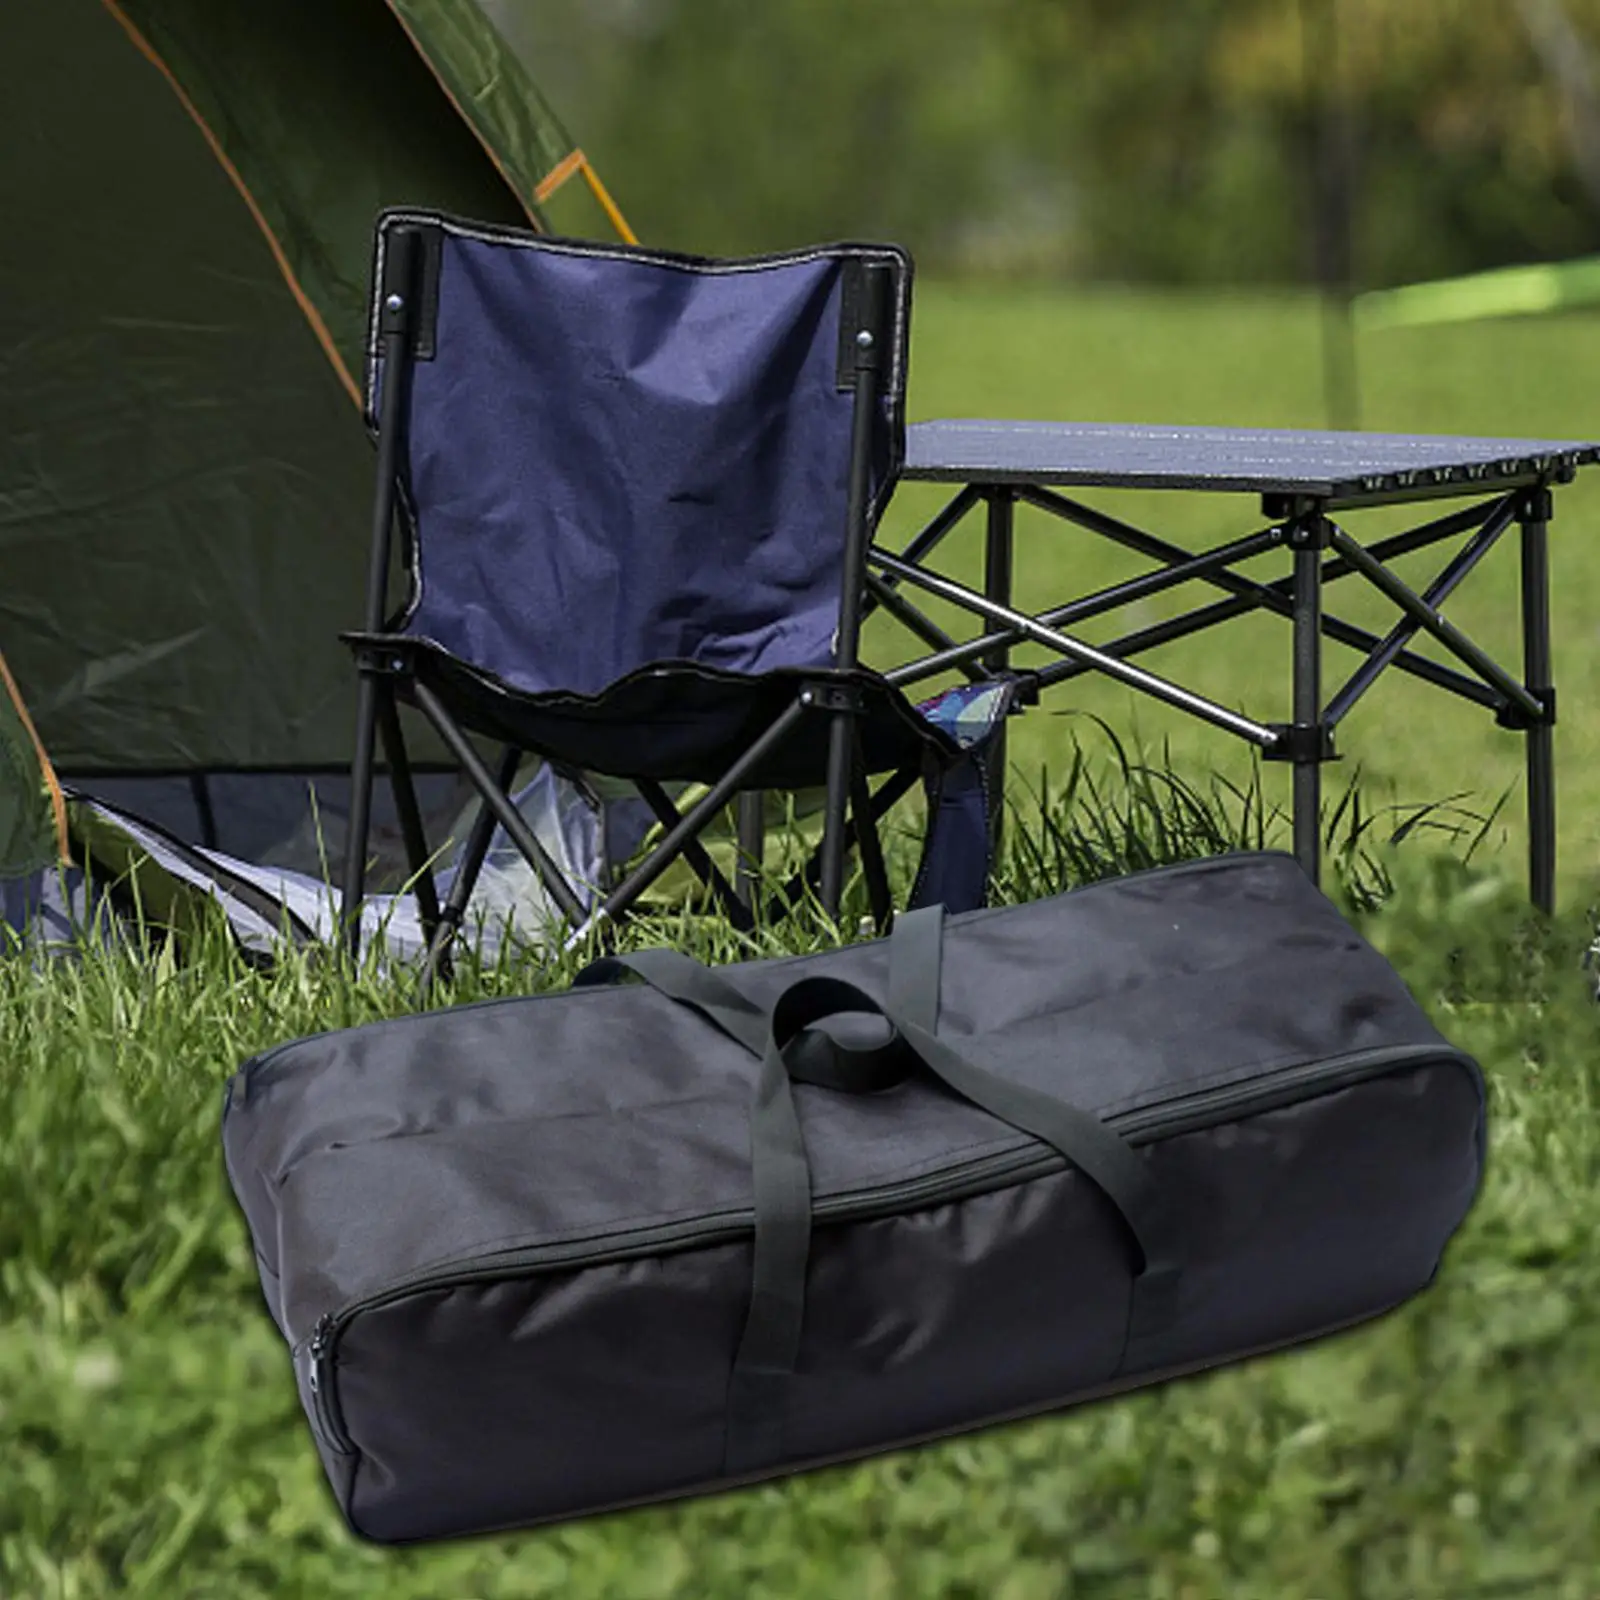 Camping Tool Bag Folding Chair Storage Bag Oxford Cloth for Camera Bracket and Fishing Pole Dimension 67x29x19cm Carrying Bag